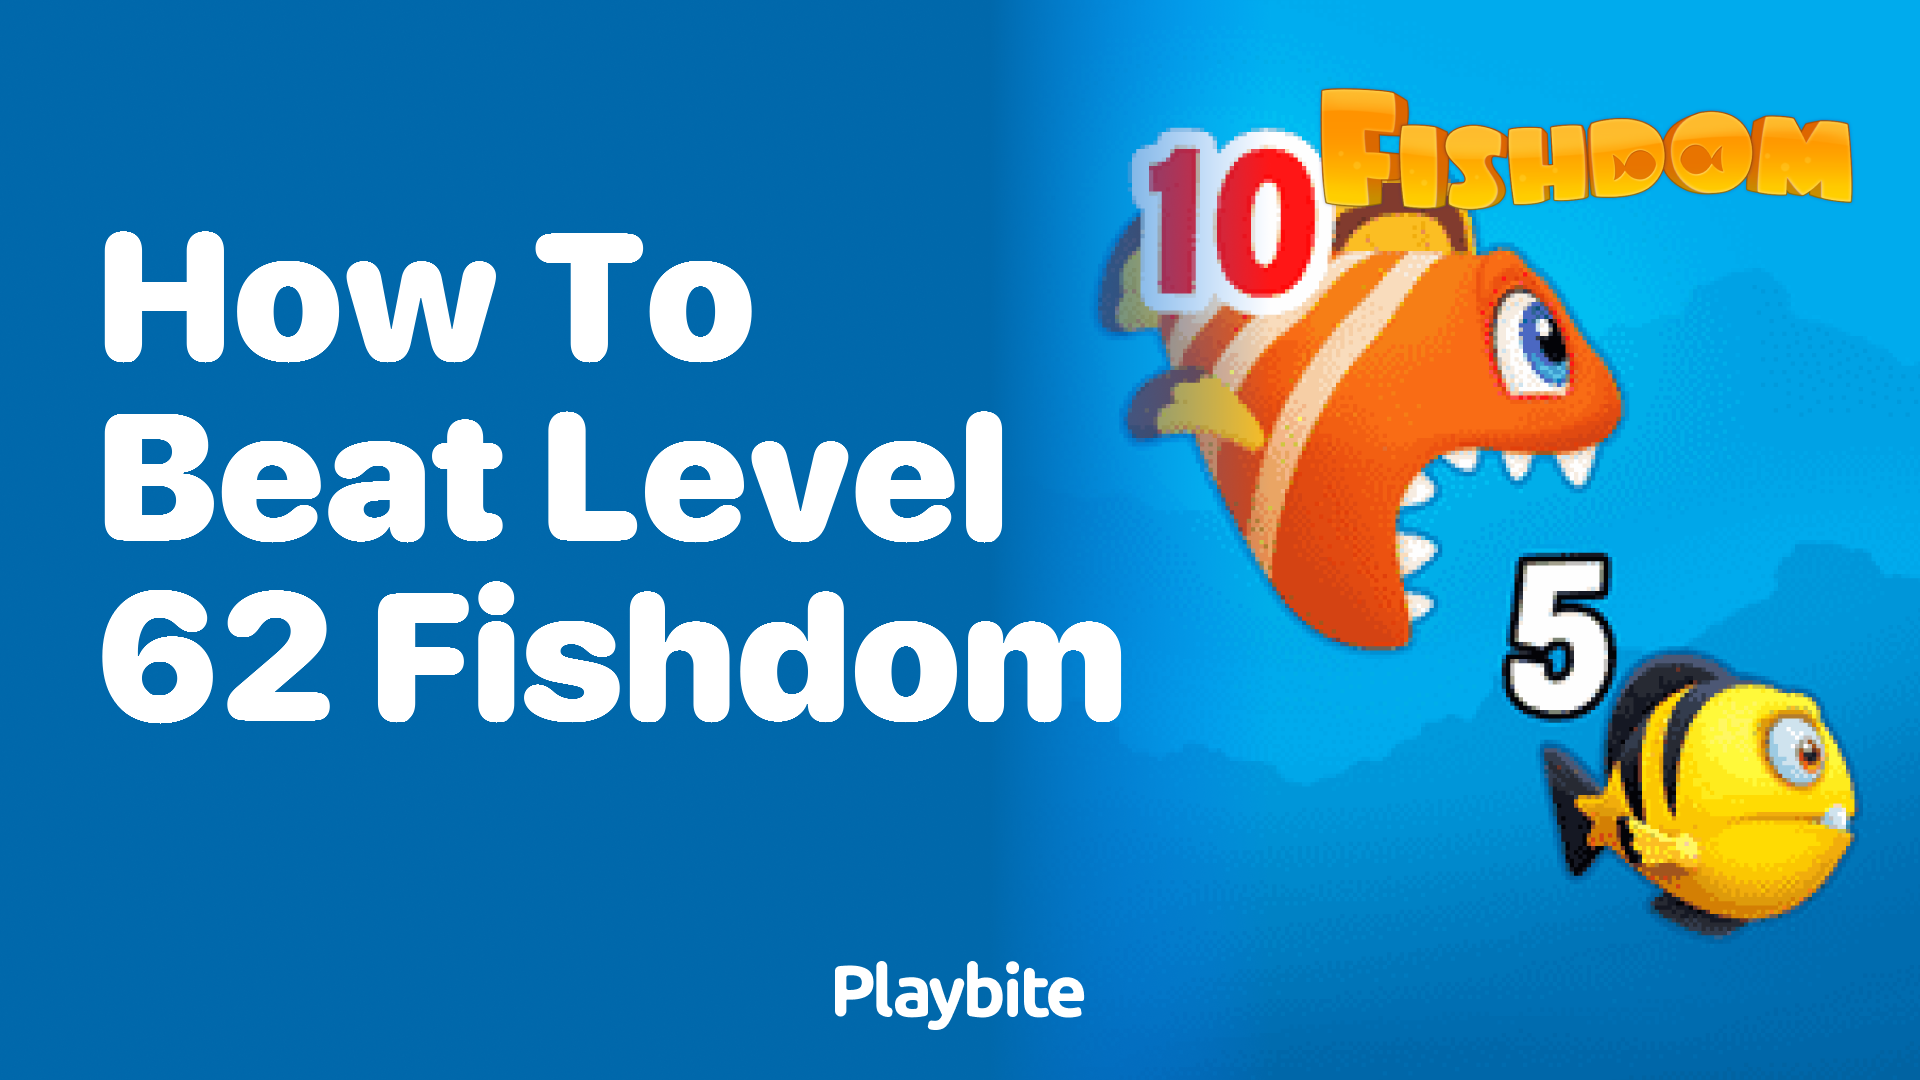 How to Beat Level 62 in Fishdom